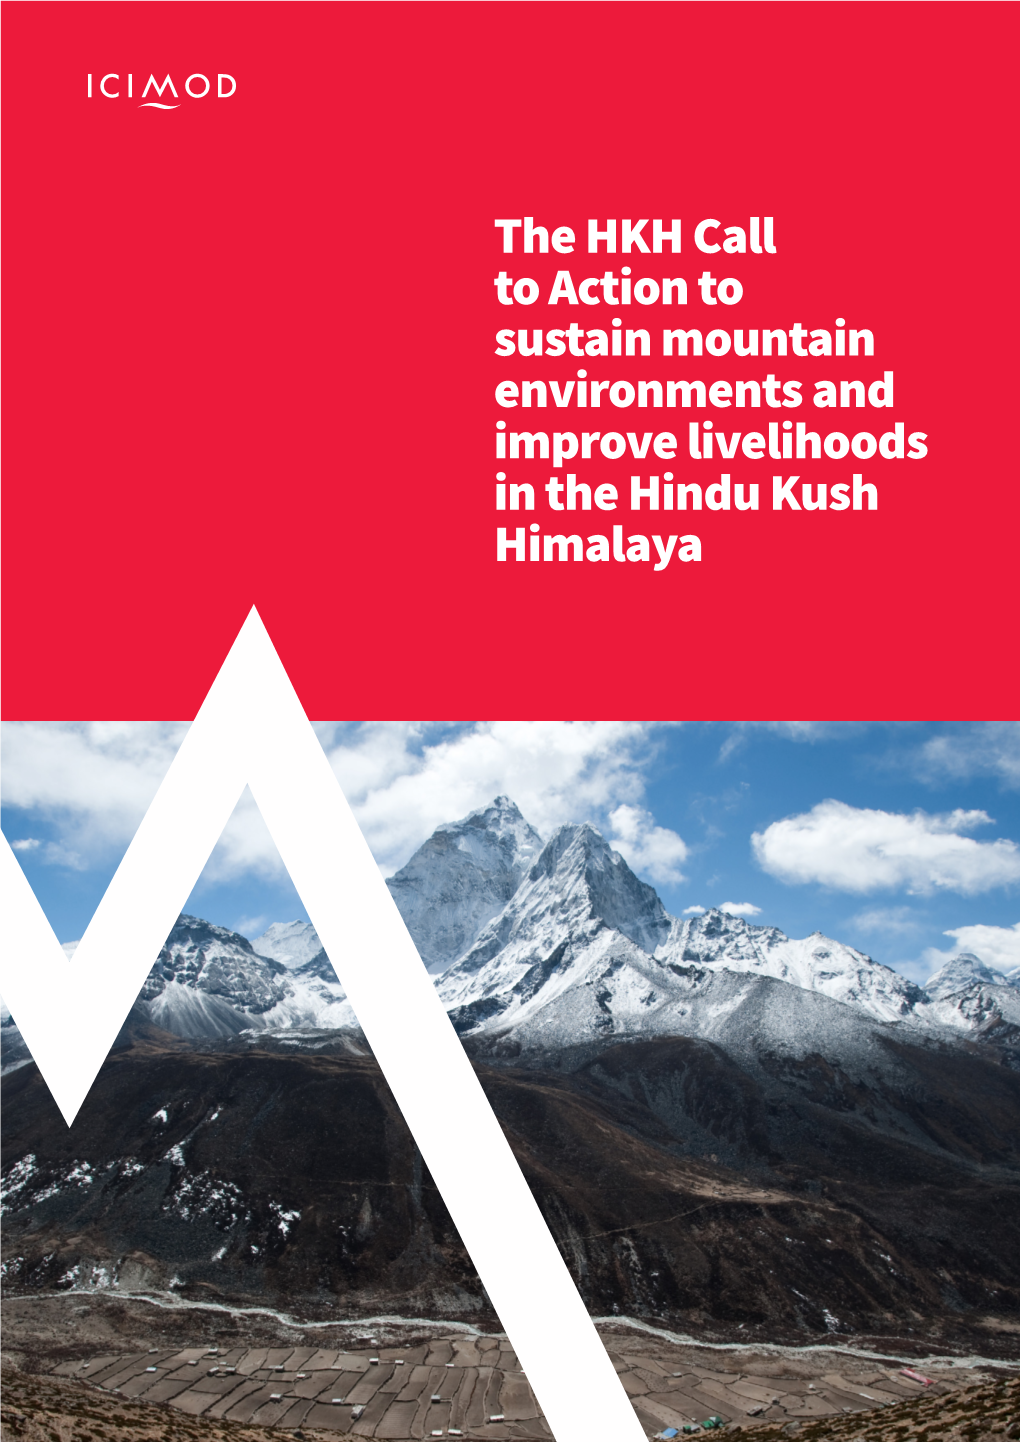 The HKH Call to Action to Sustain Mountain Environments and Improve Livelihoods in the Hindu Kush Himalaya